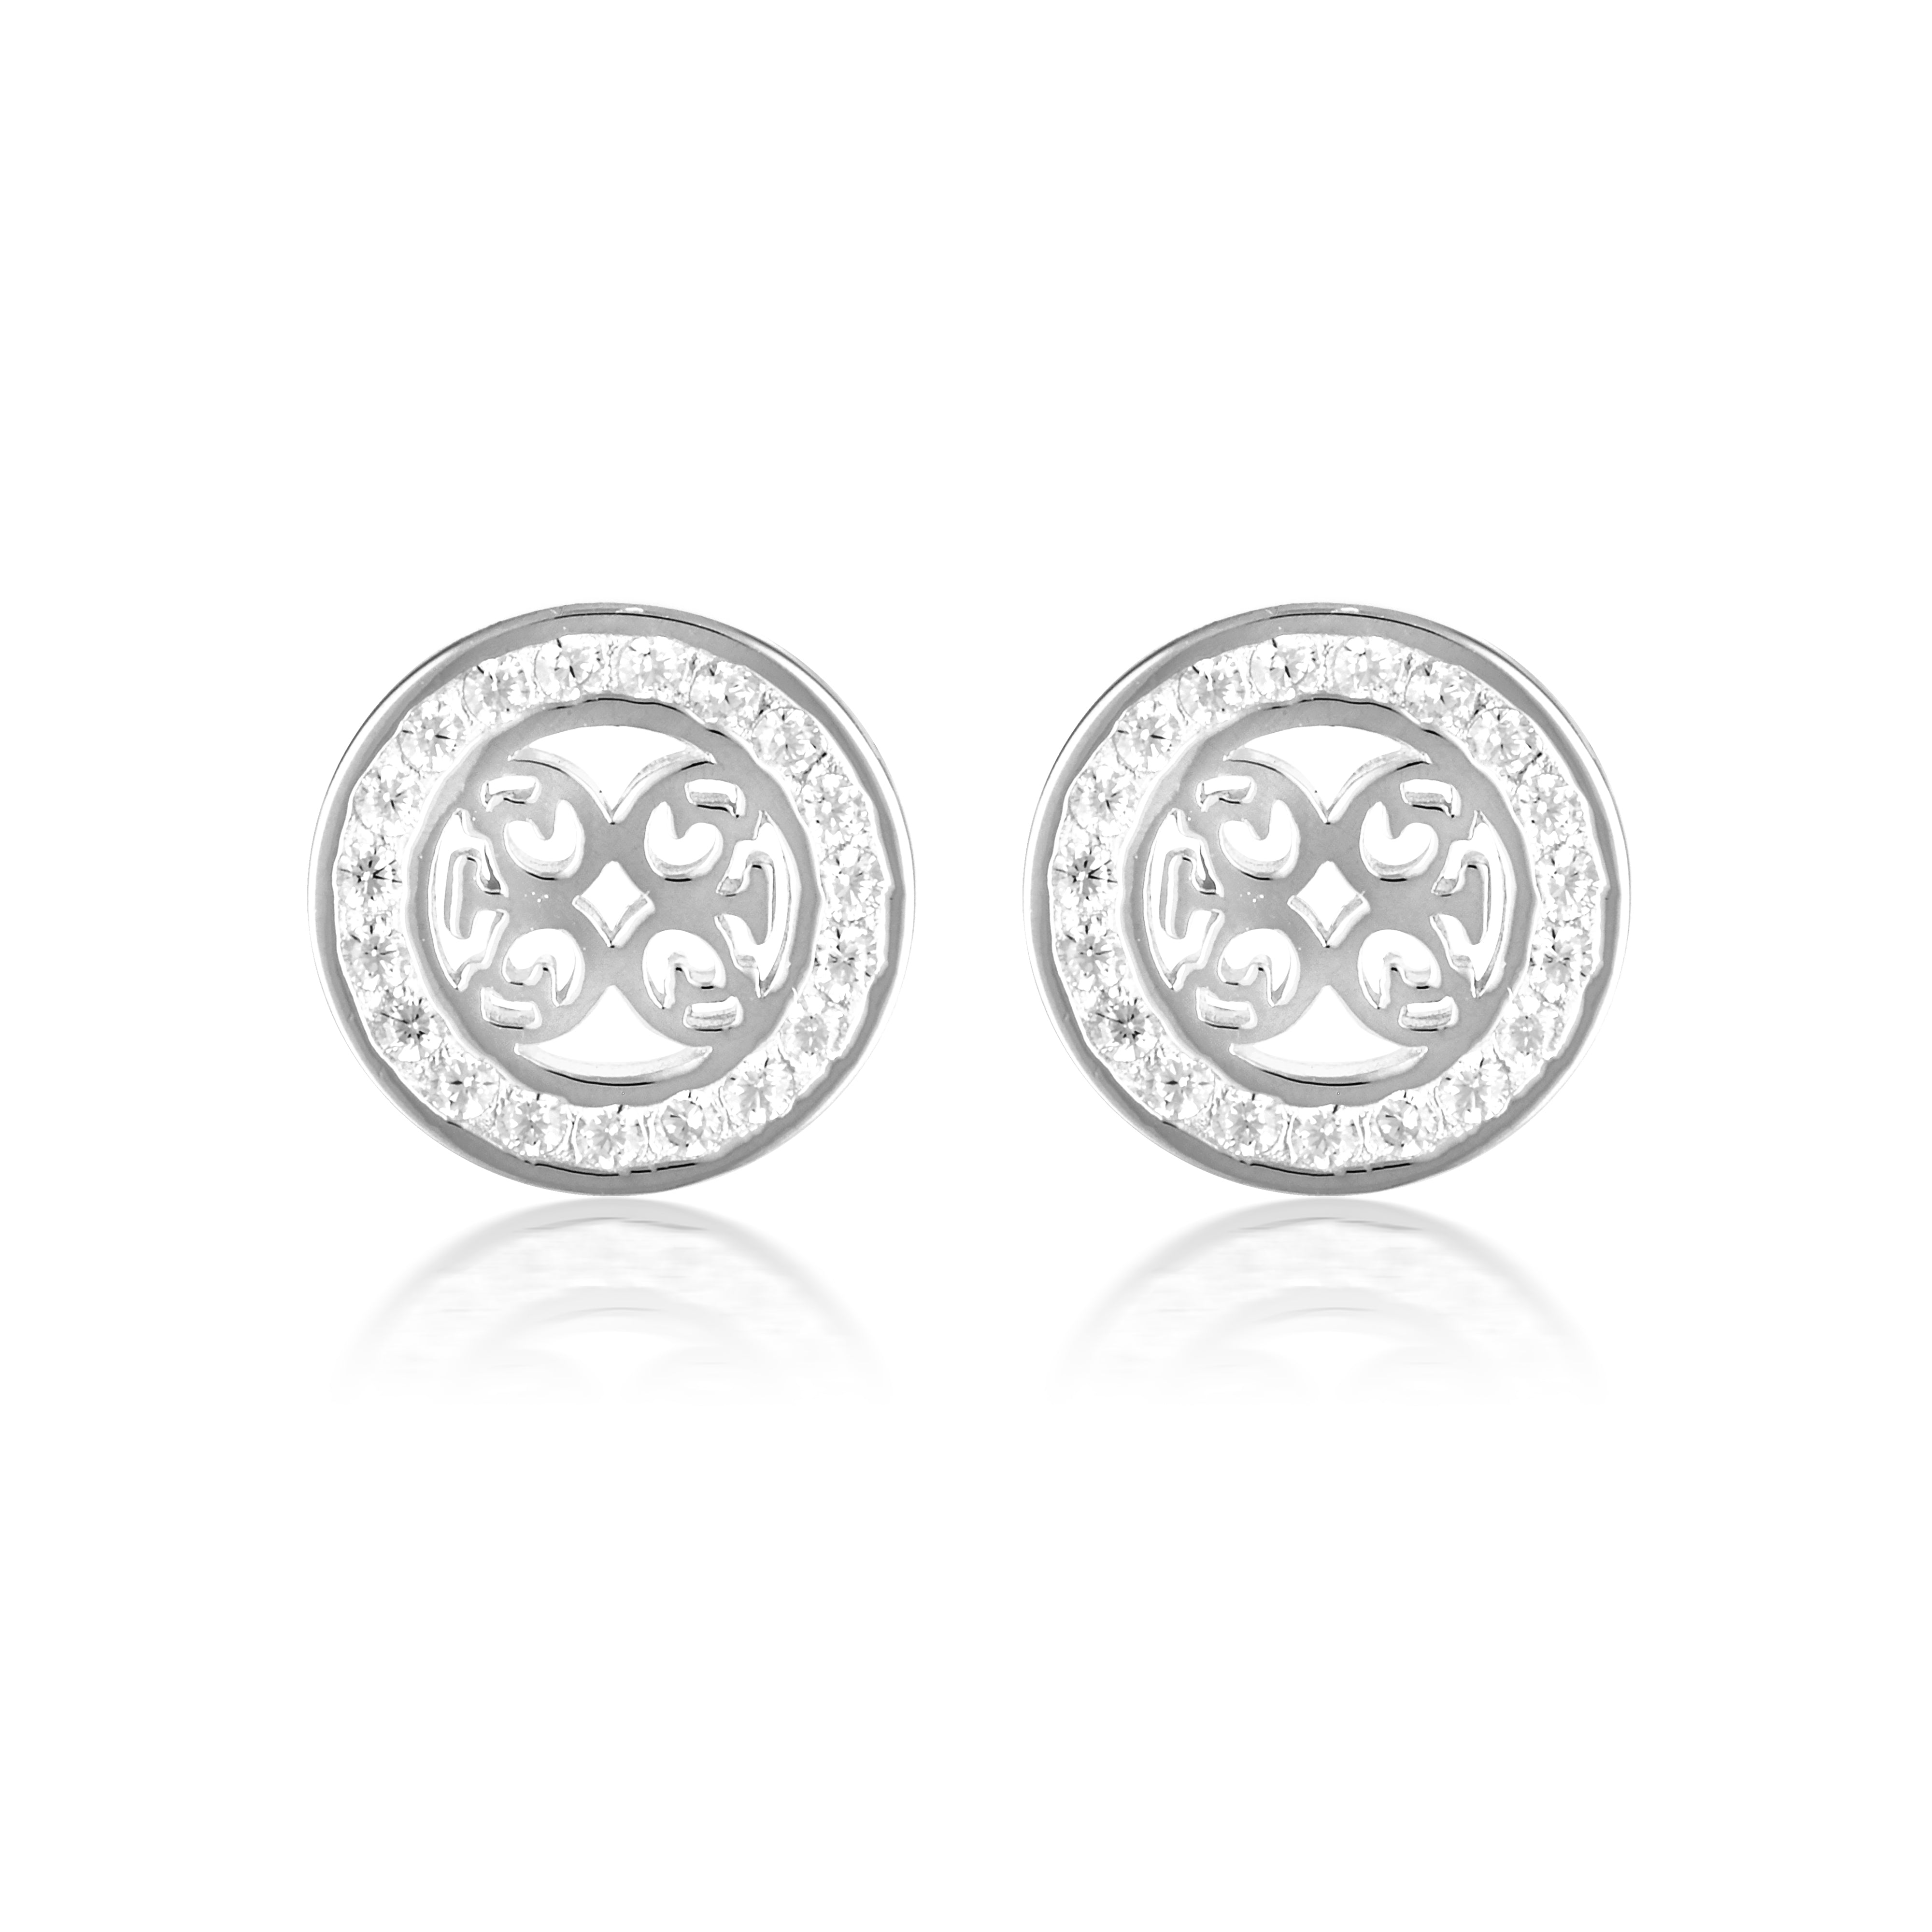 SIGNATURE MEDALION EARRINGS SILVER